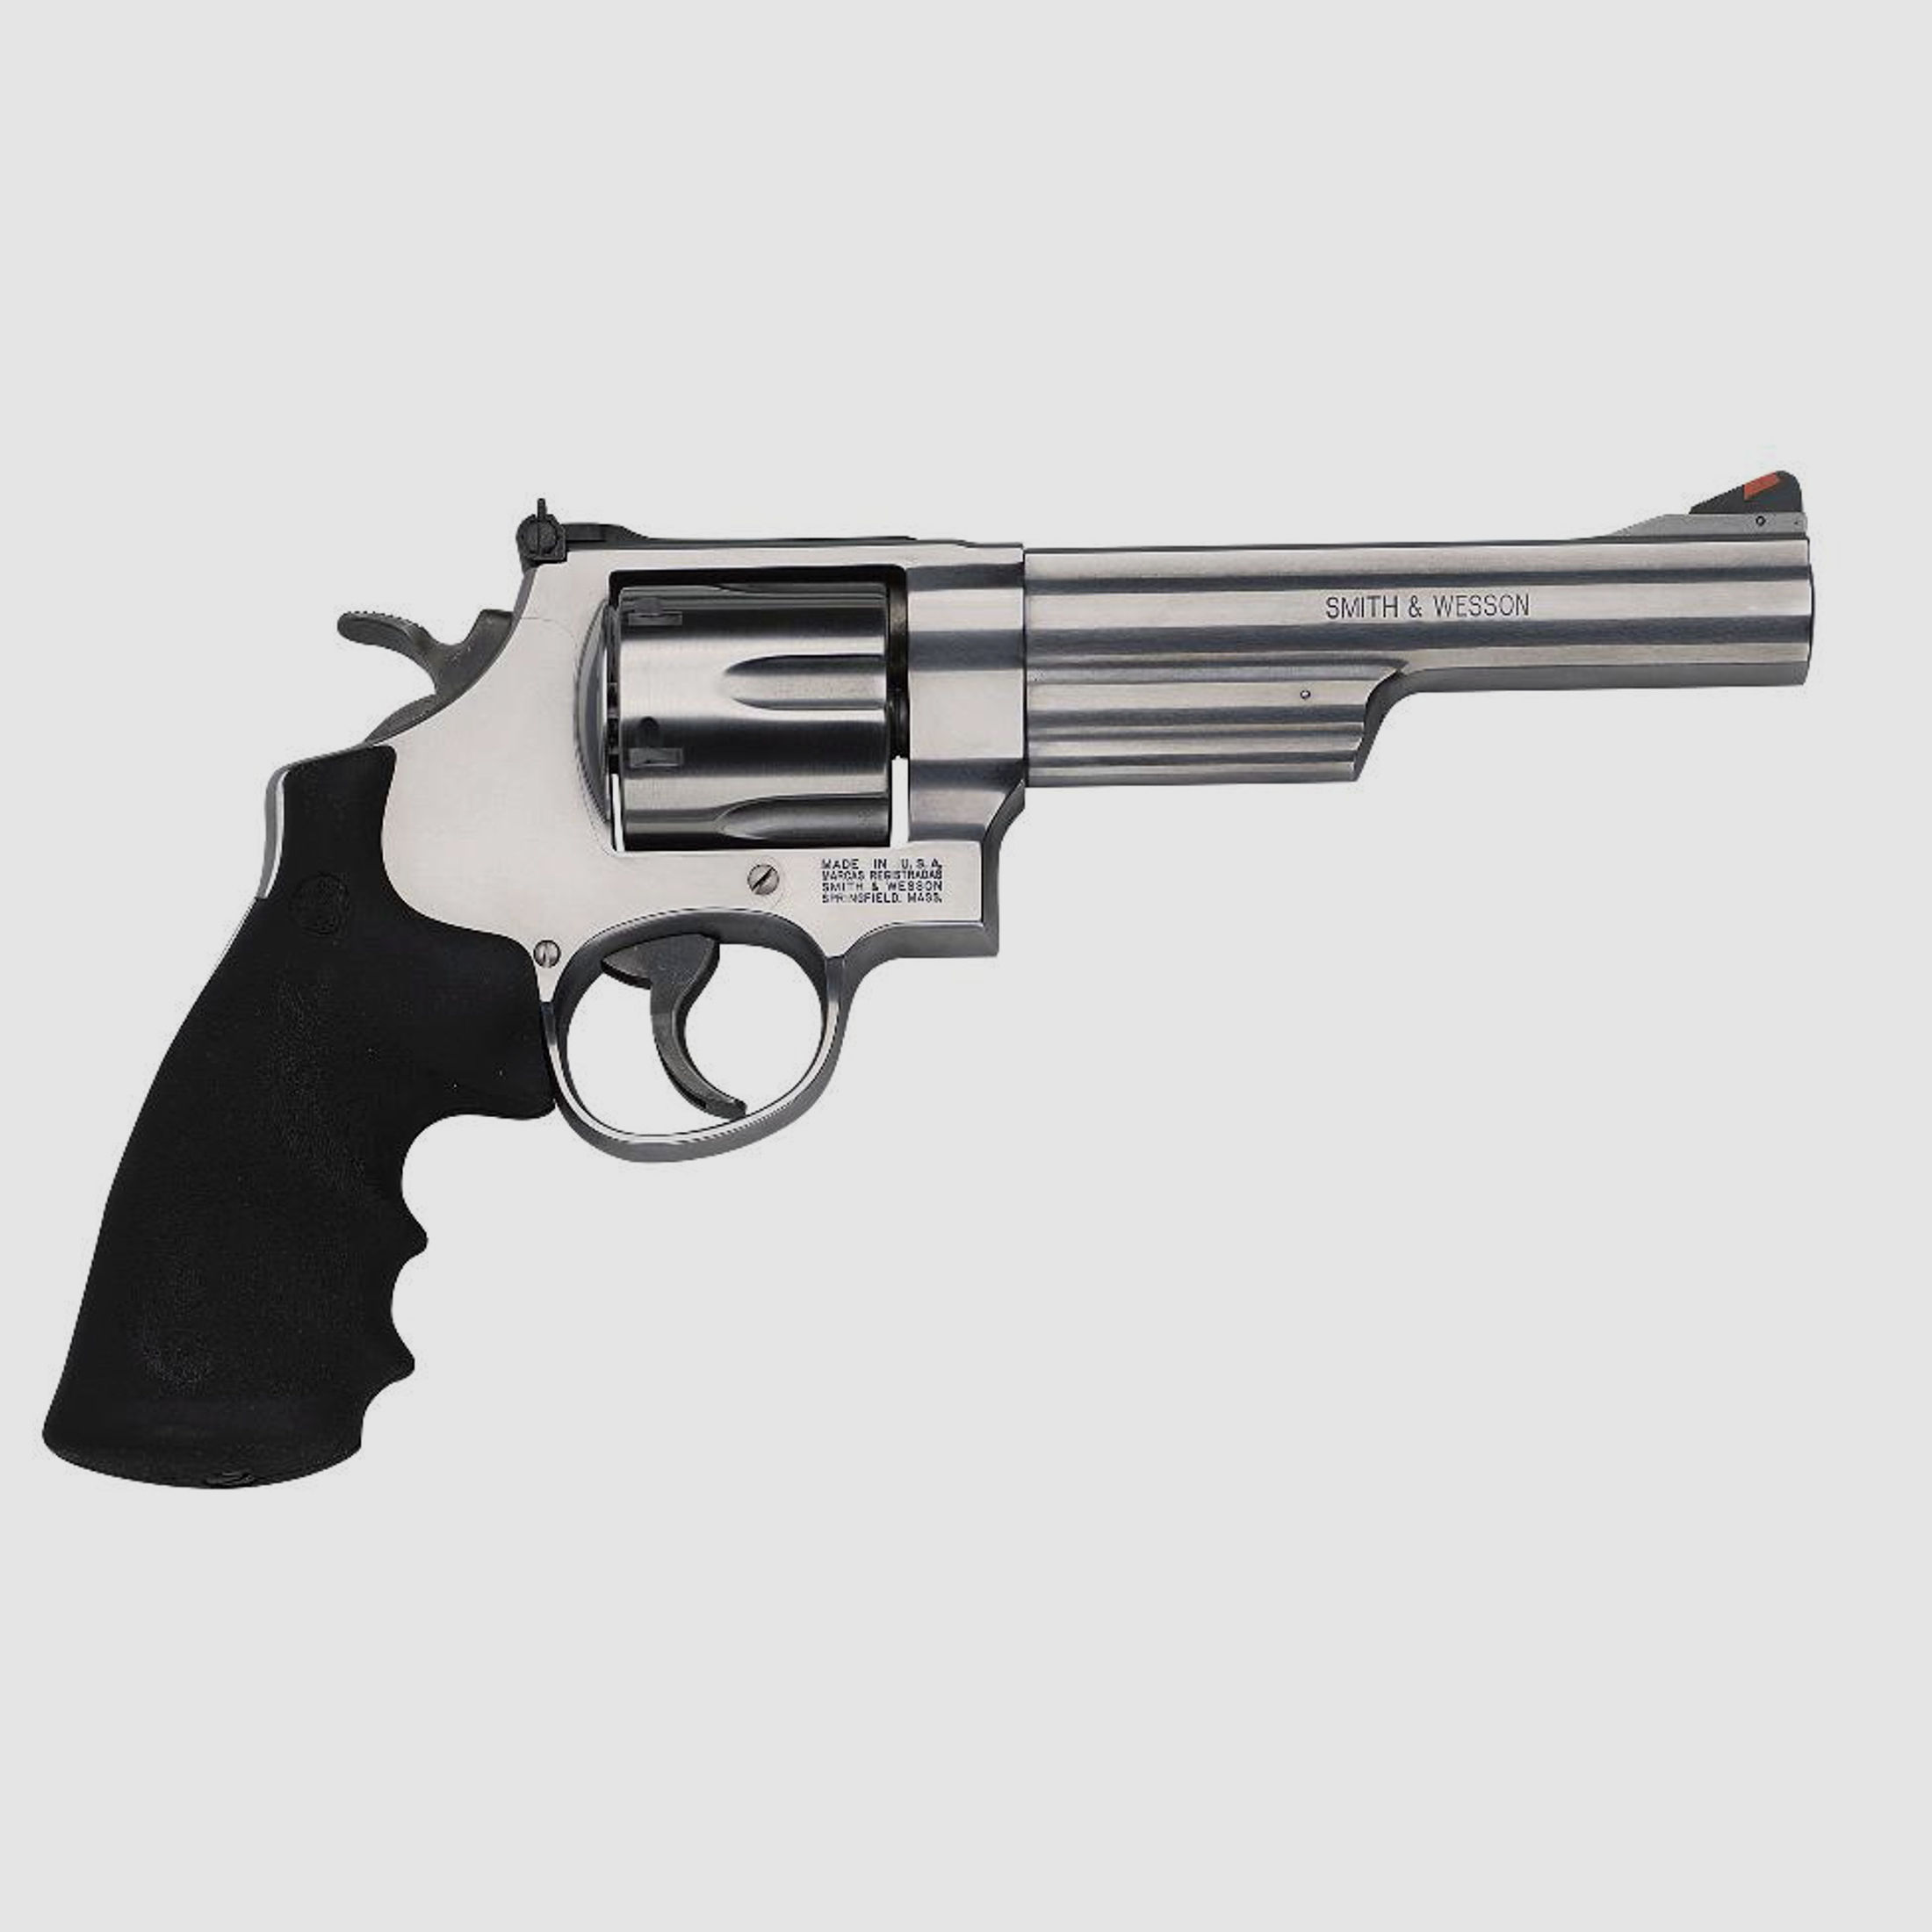 Smith & Wesson Modell 629